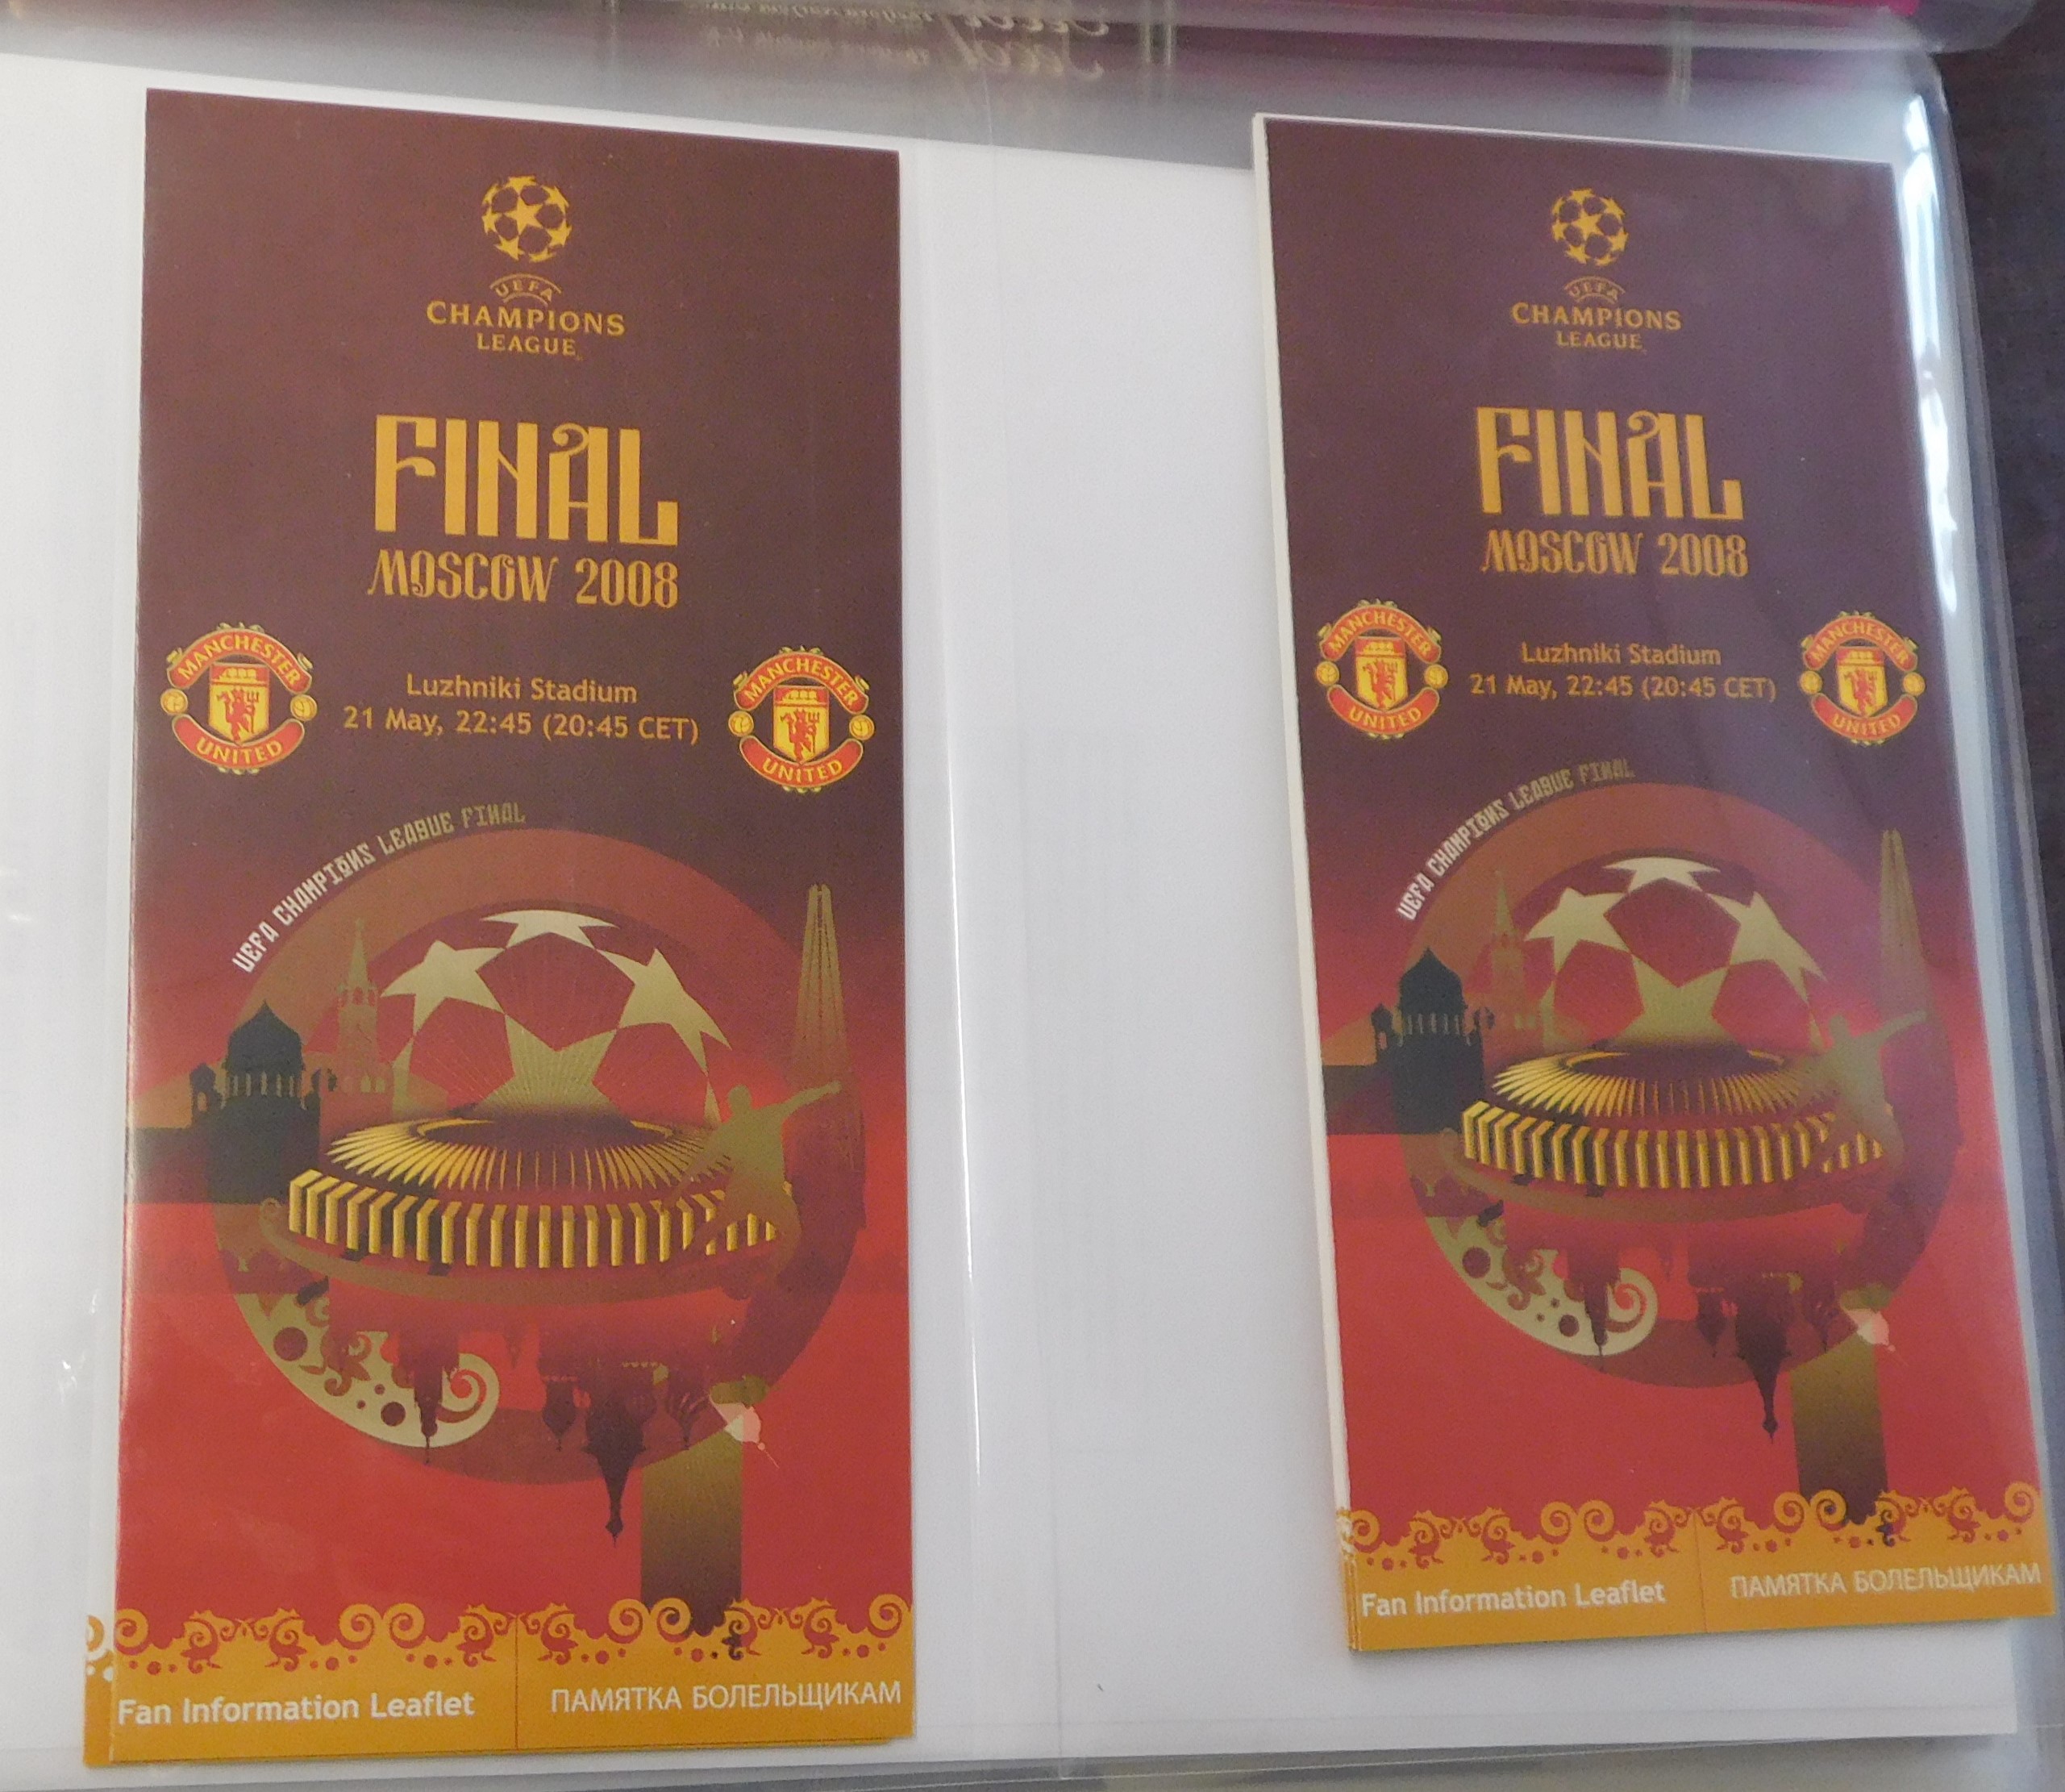 A binder of items chronicling Manchester United's Champions League victory over Chelsea in Moscow on - Bild 2 aus 4